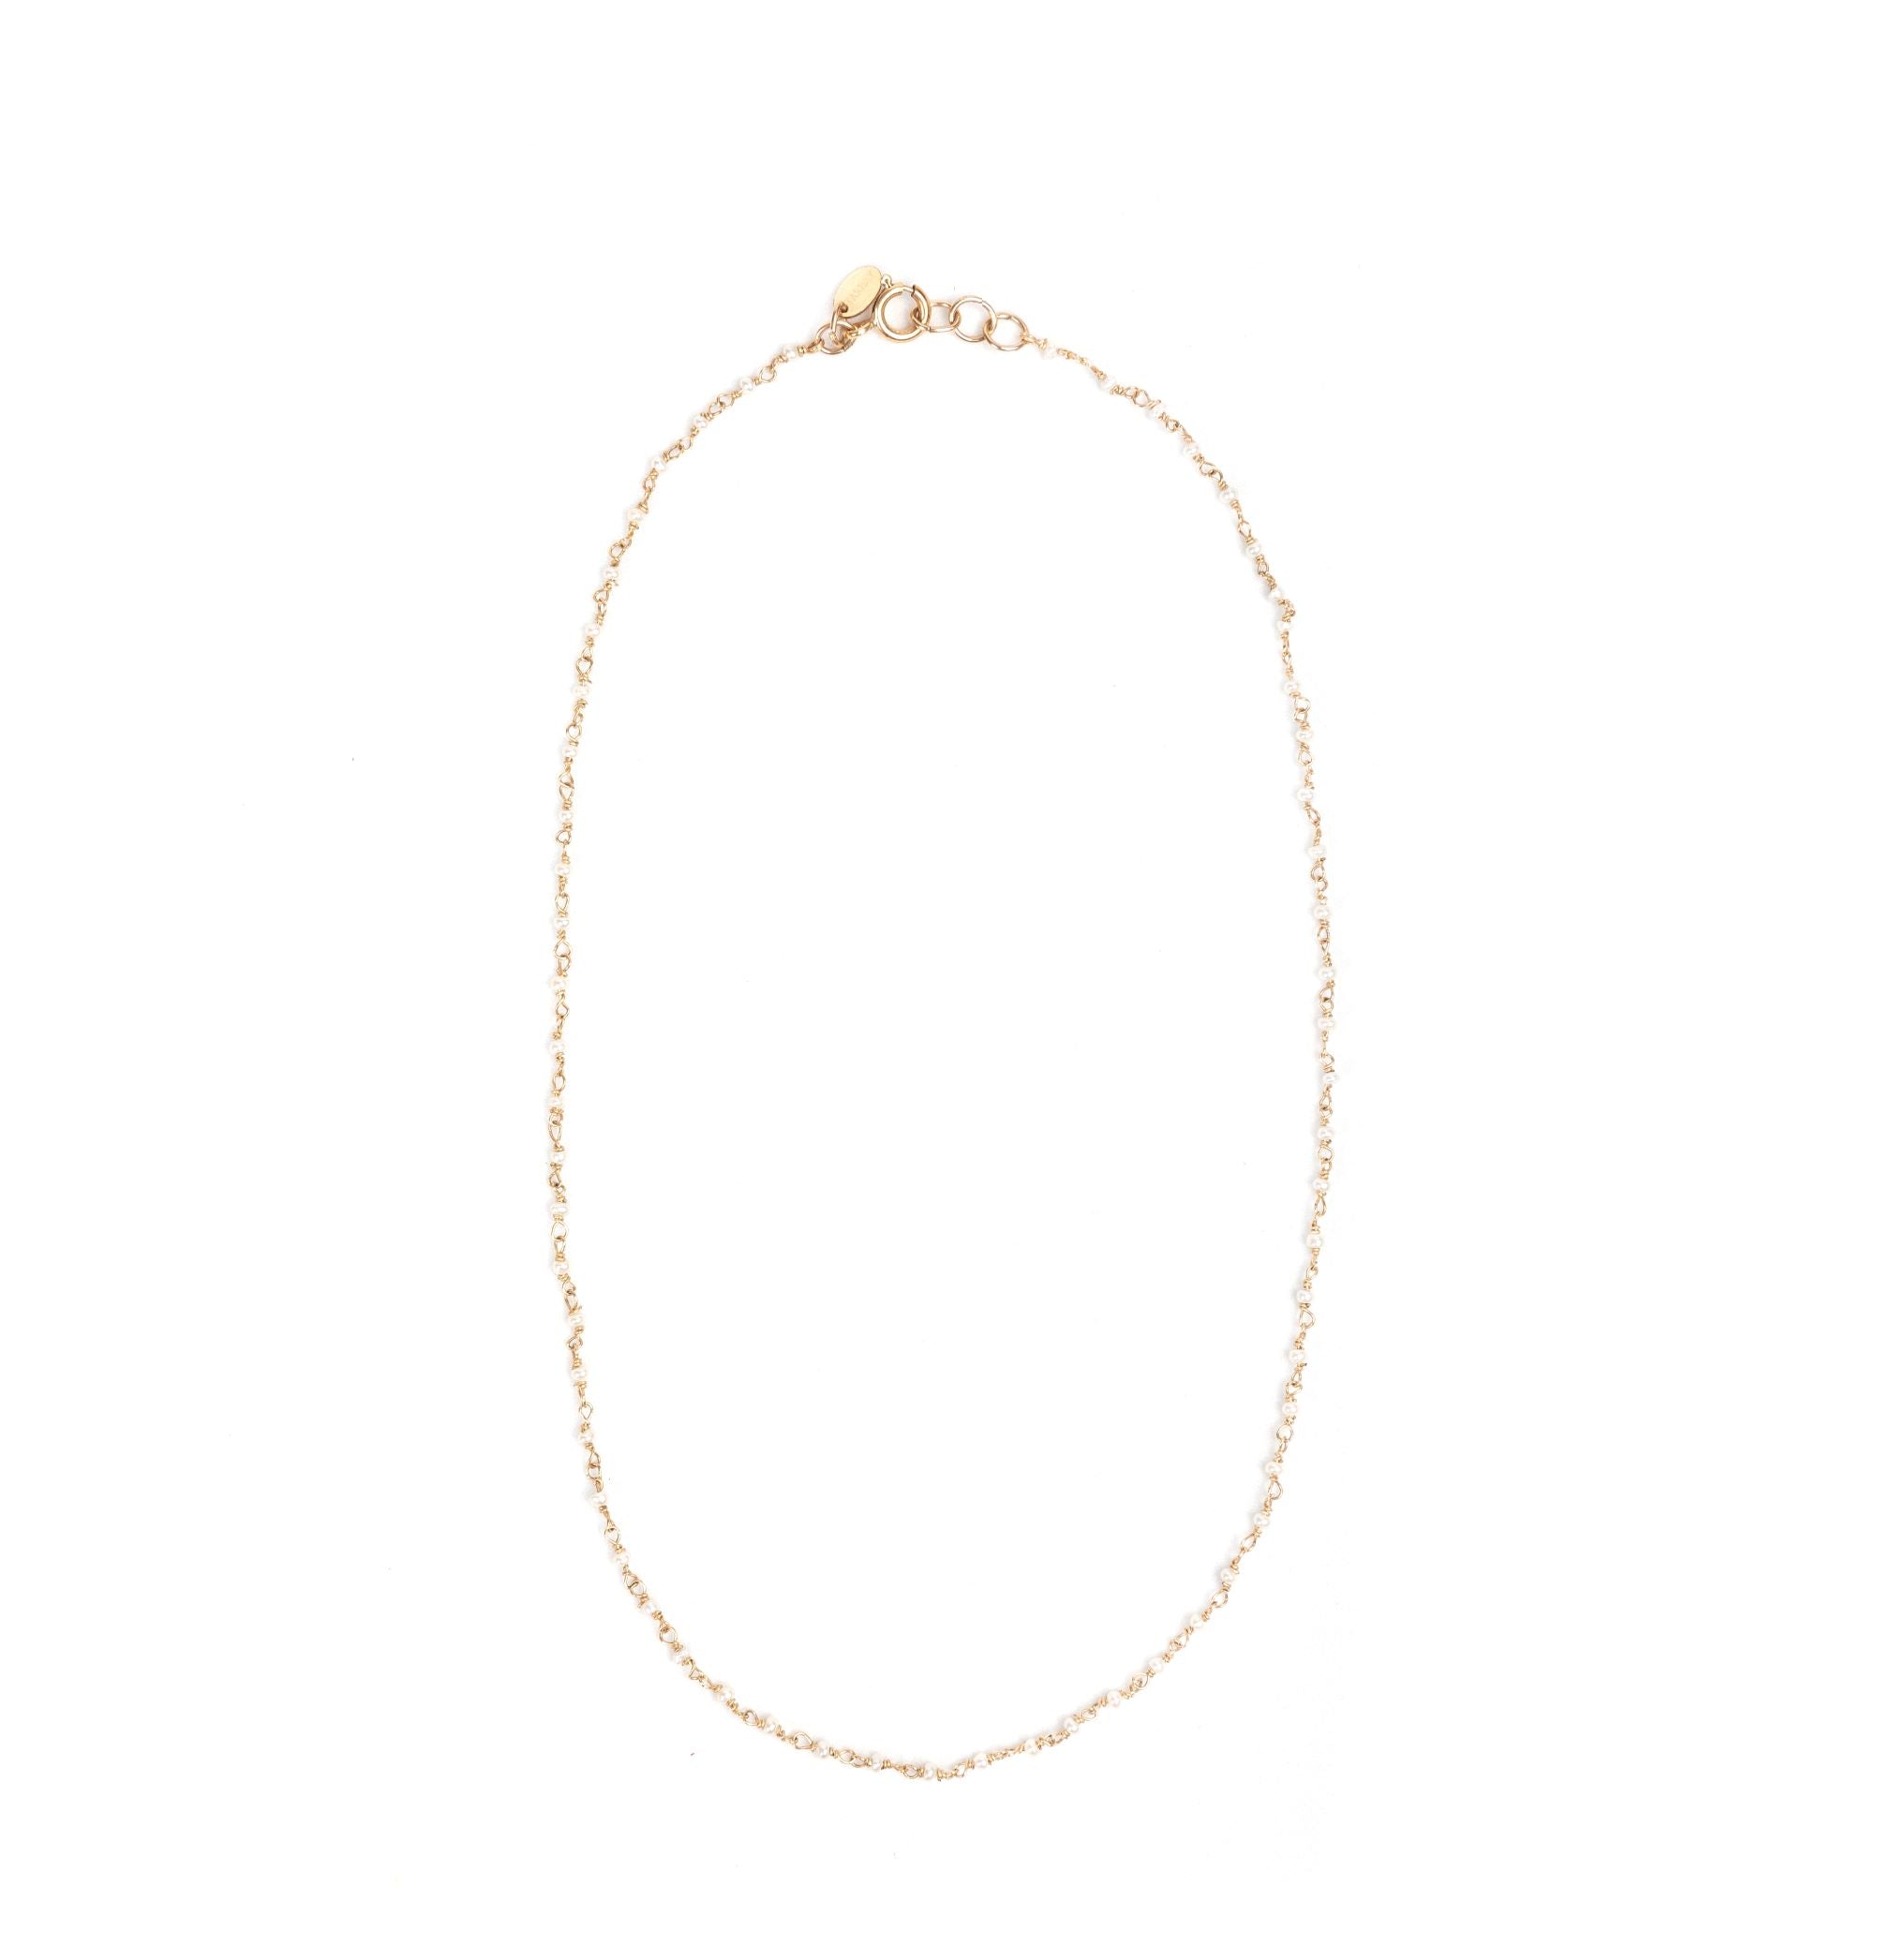 Pearl Necklace #1 (1.5-2mm) - Pearl & Yellow Gold Necklaces TARBAY   